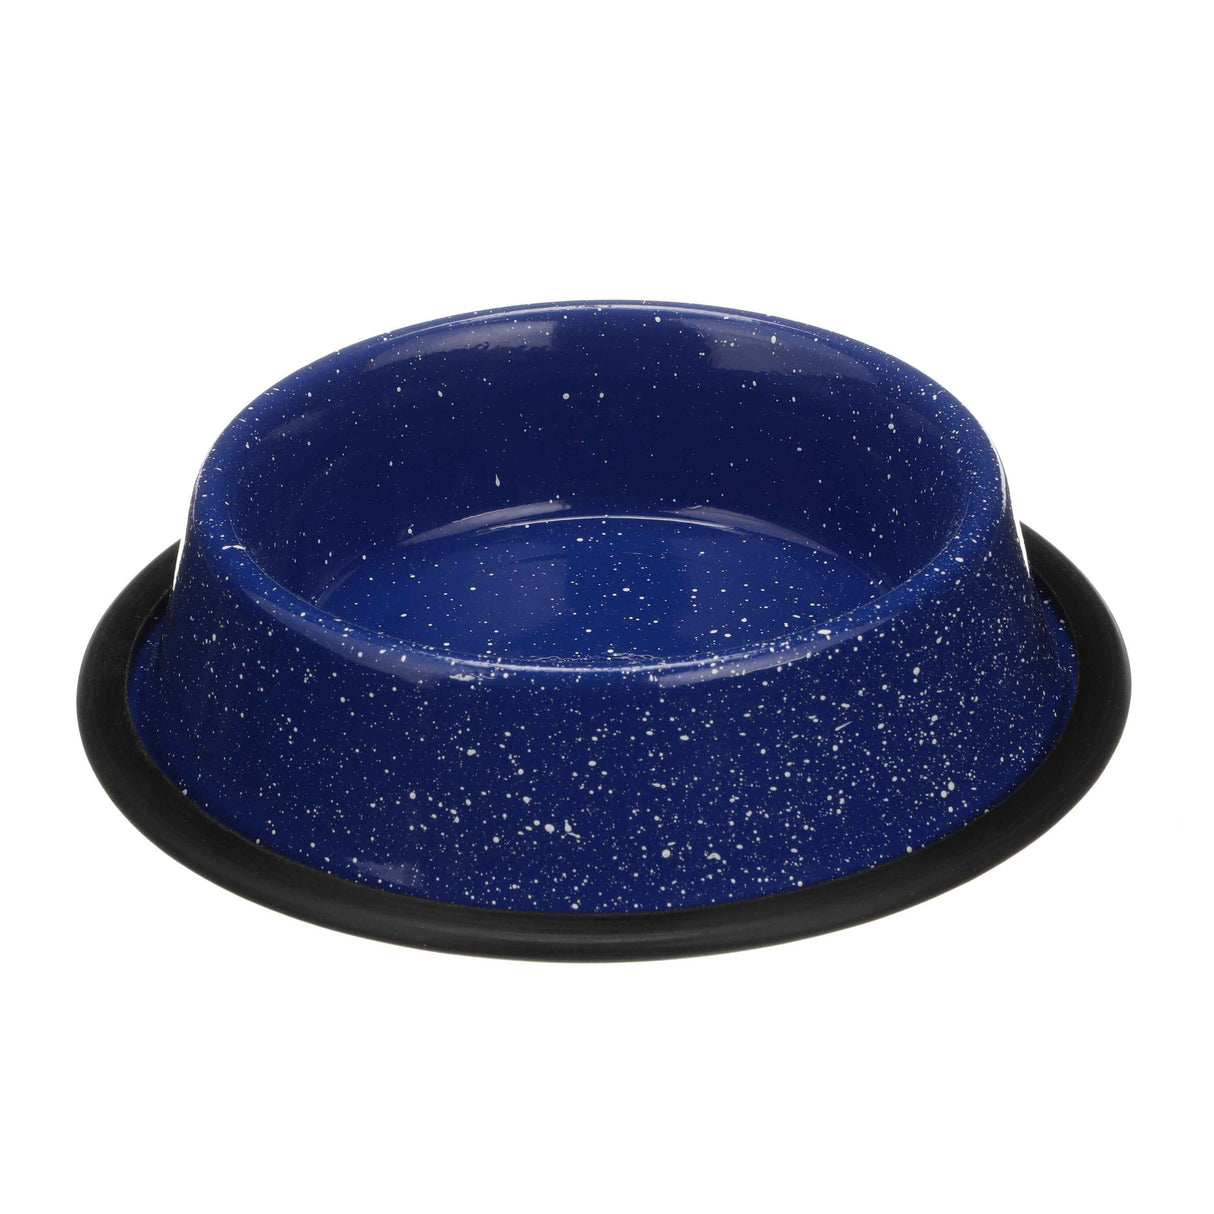 Blue Camping Bowl with white specs